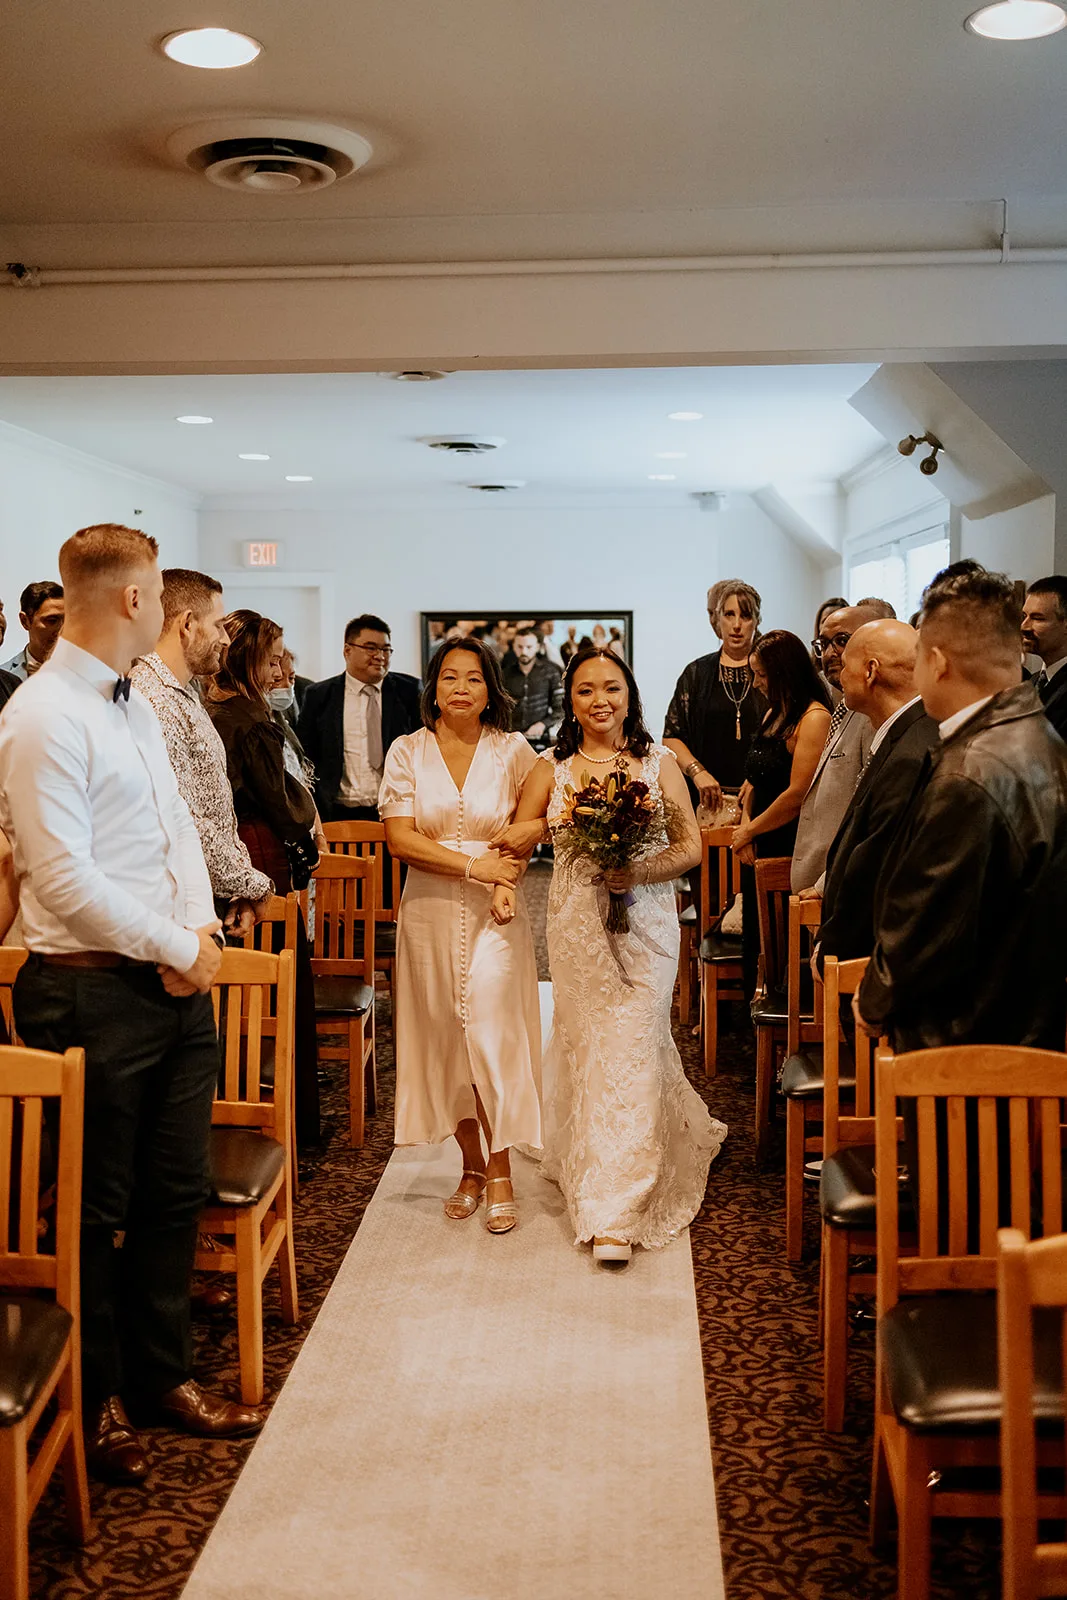 Nikki walking down the aisle to Thomas with her mother, Ryan Funk Photography